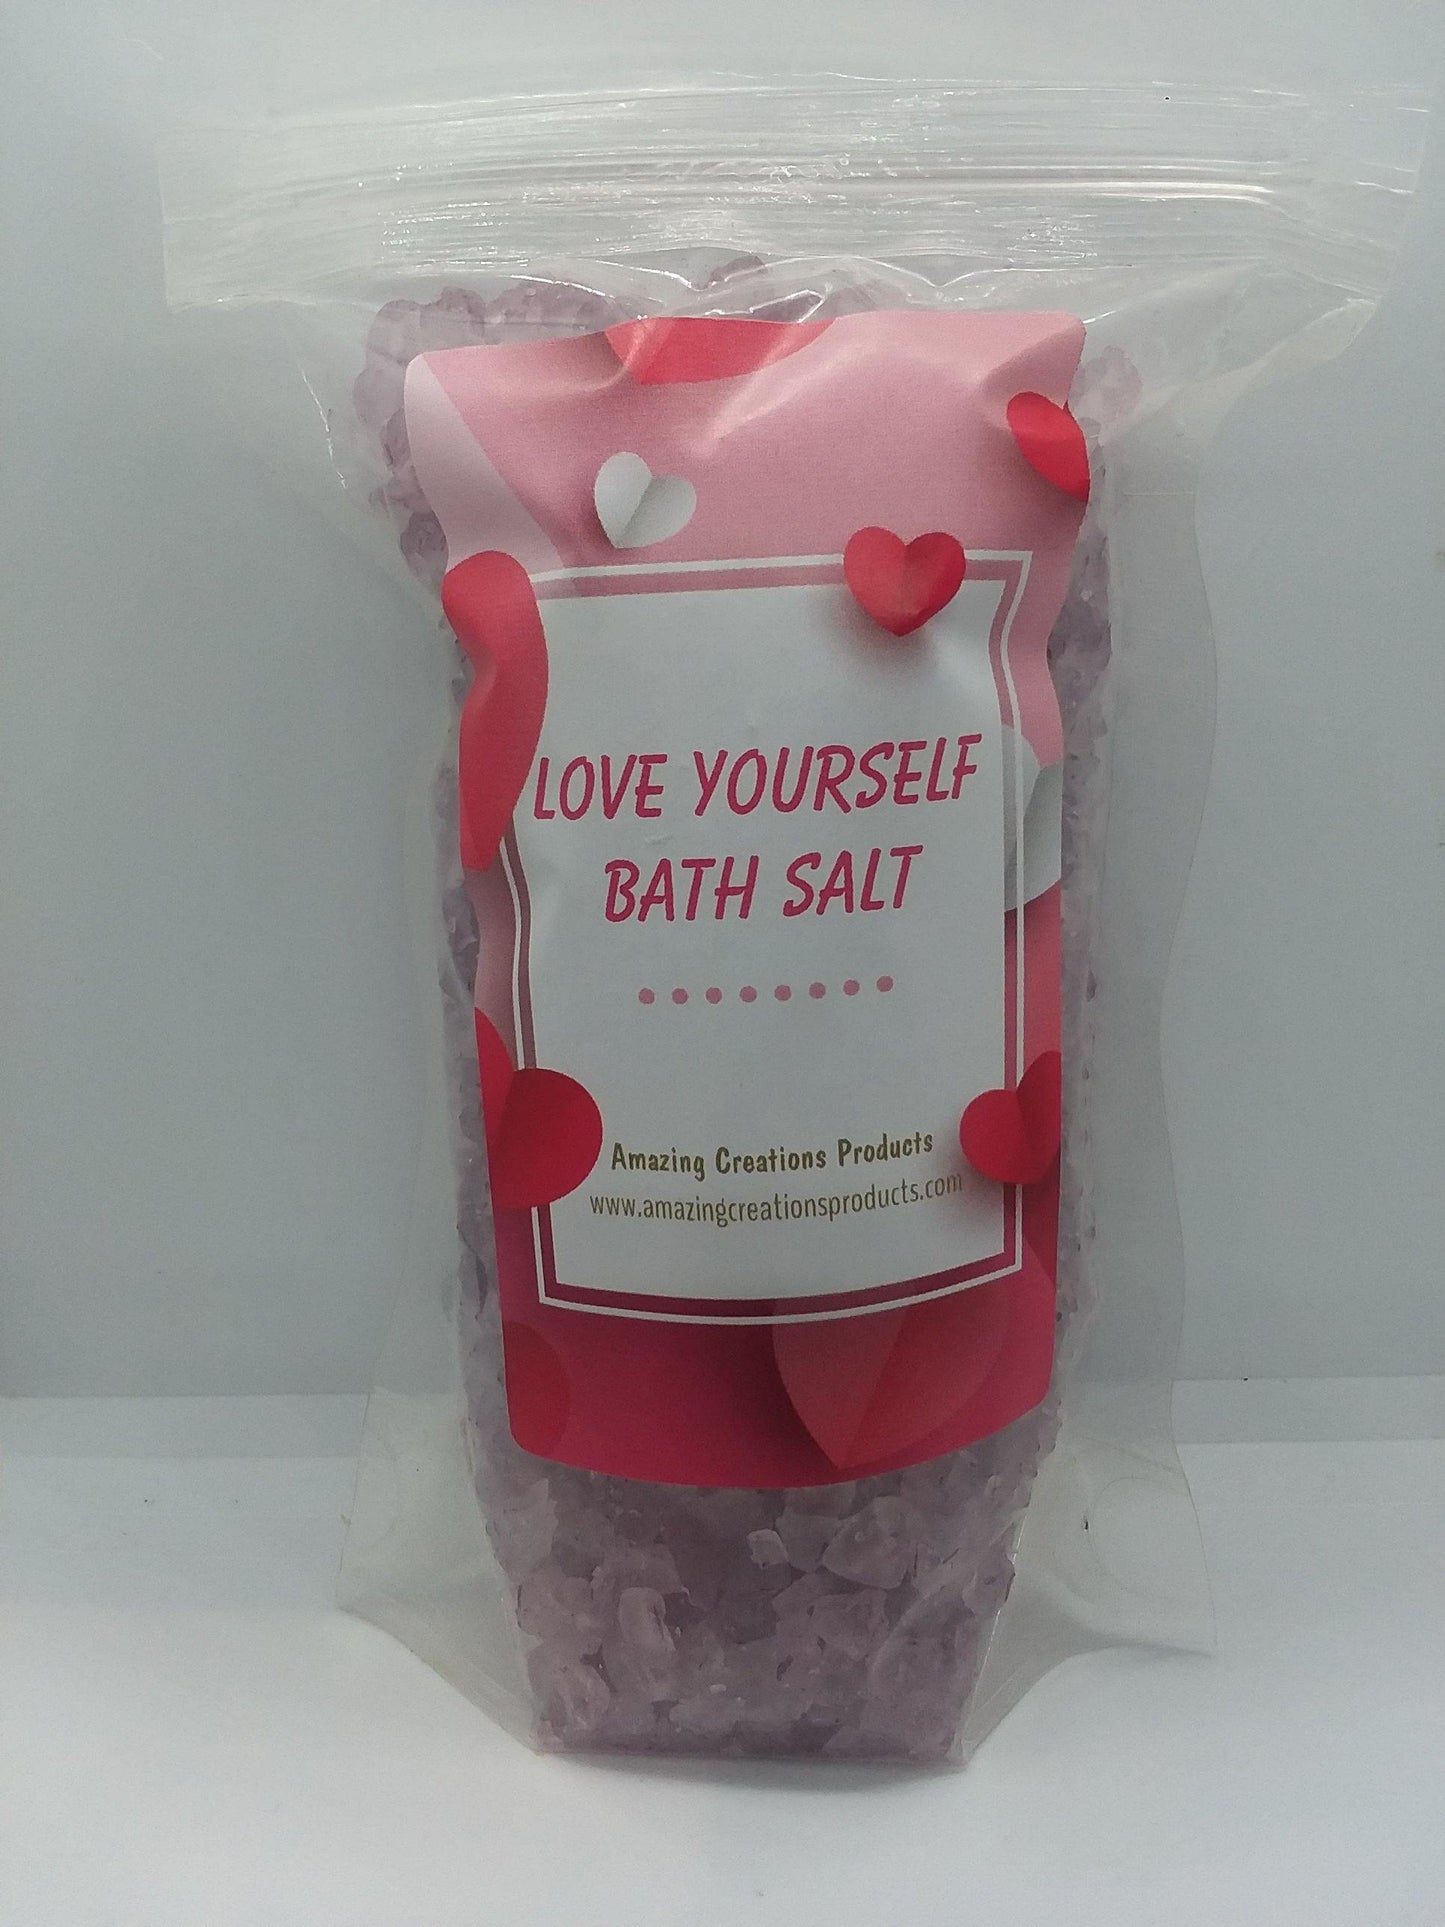  Love Yourself Bath Salt - Bath Salts available at Amazing Creations Products . Grab yours for $10.00 today!